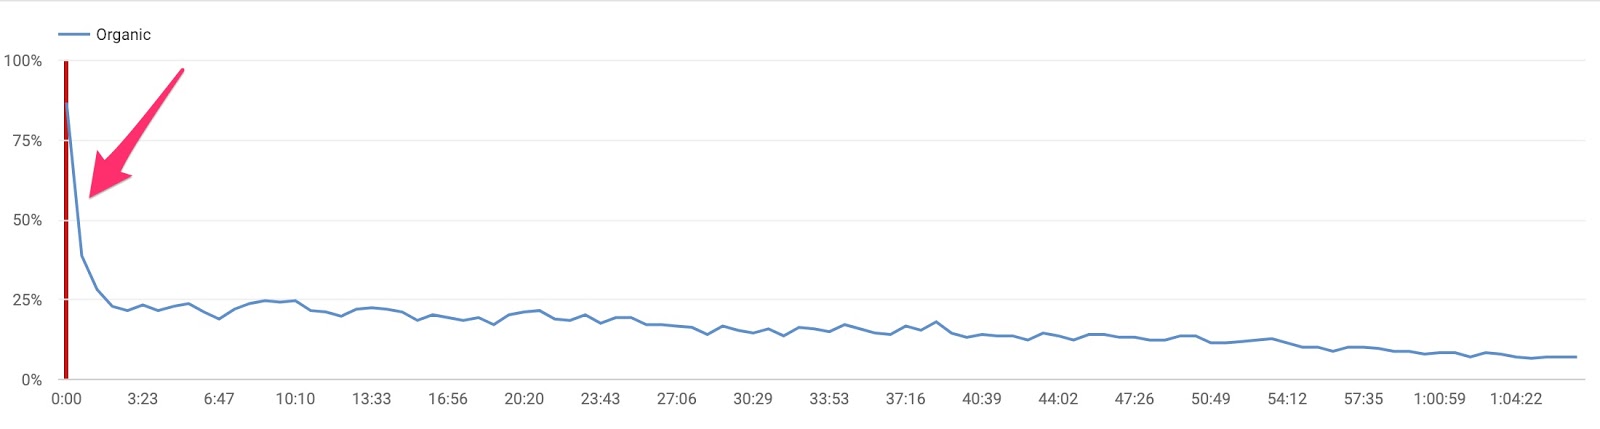 bad audience retention on youtube 2